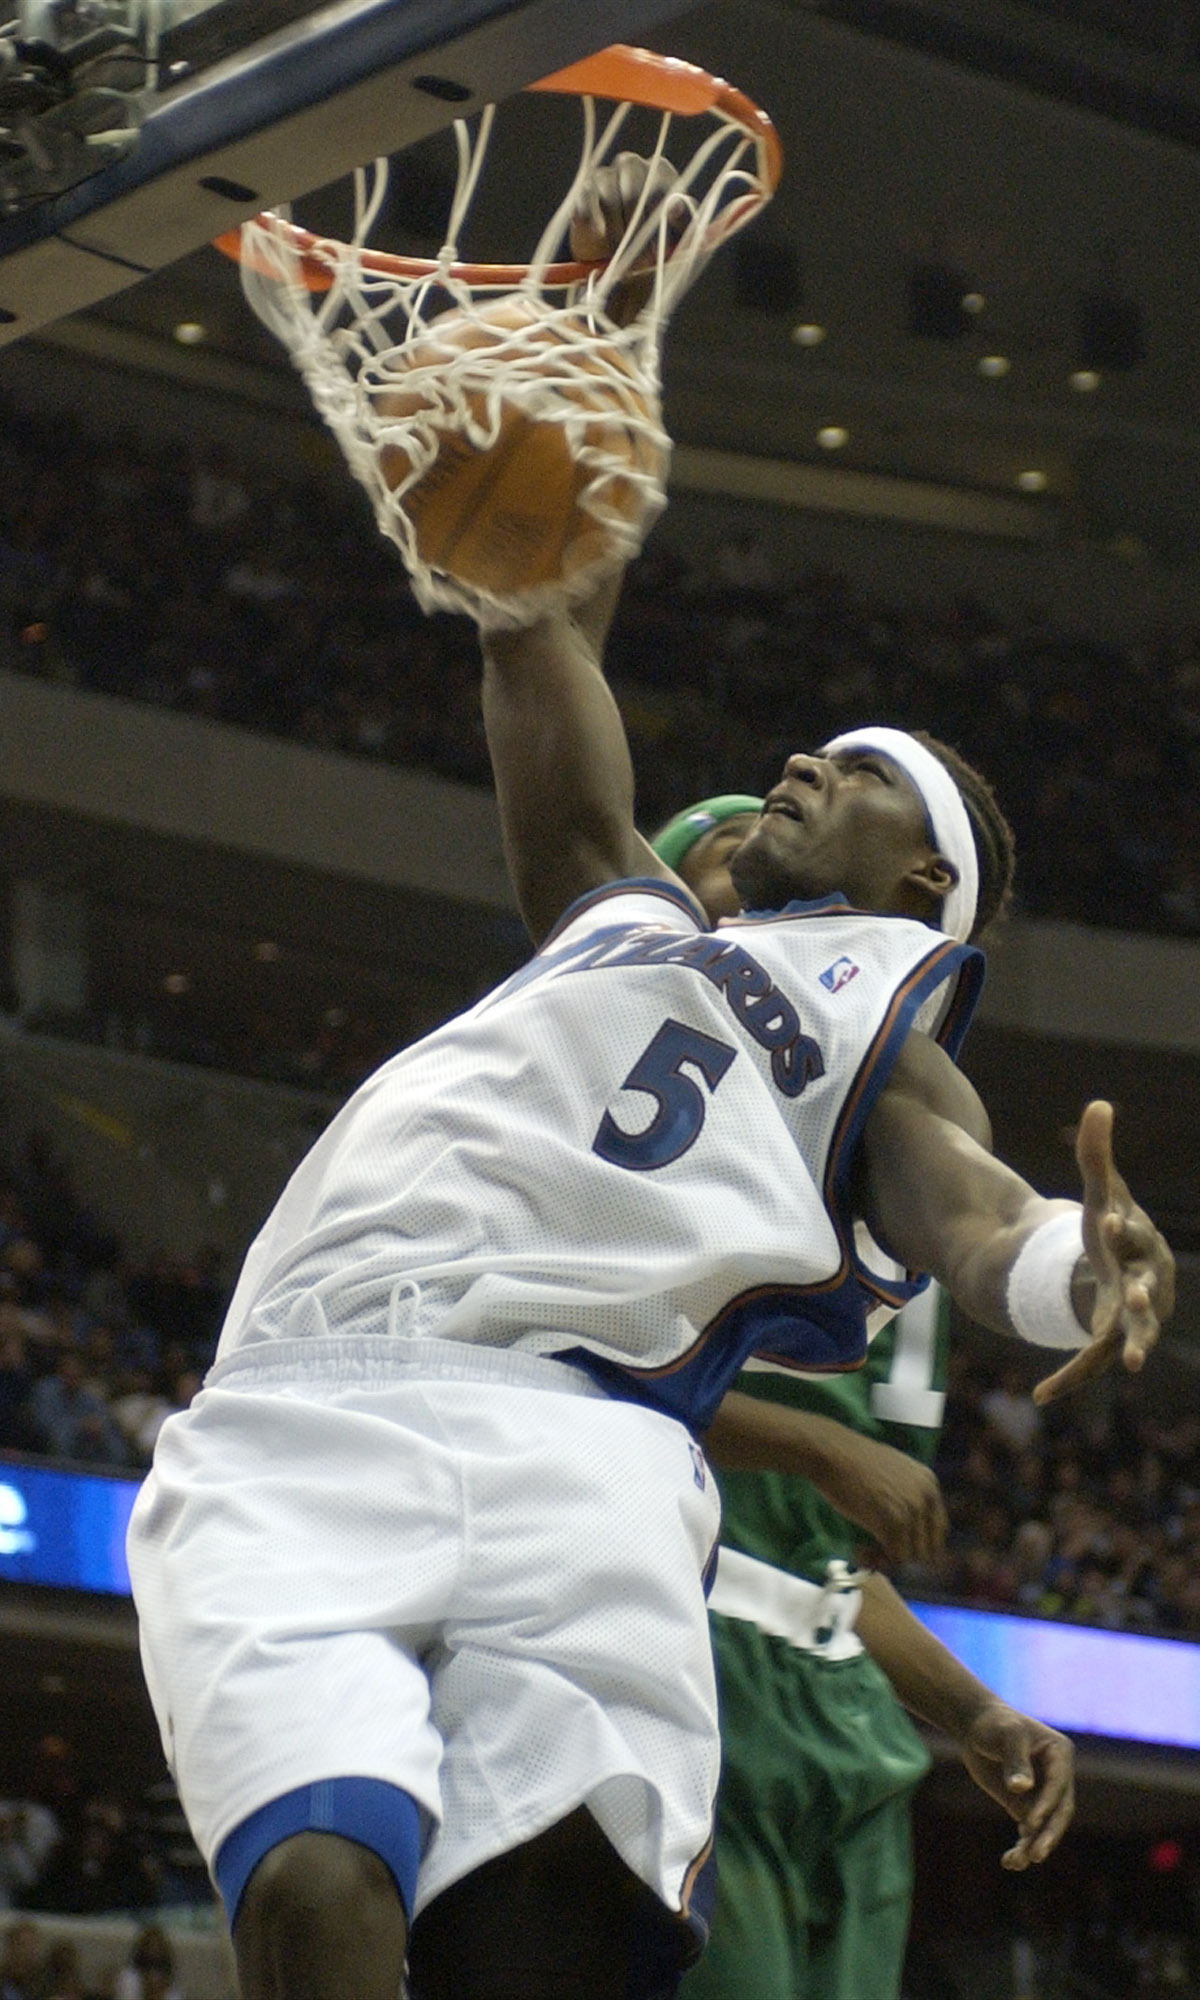 Then Washington Wizard Kwame Brown (5) dunks against the Boston Celtics during the fourth quarter of the Wizards 114-69 win, Thursday, Oct. 31, 2002, at the MCI Center in Washington. Photo credit: Nick Wass, The Associated Press